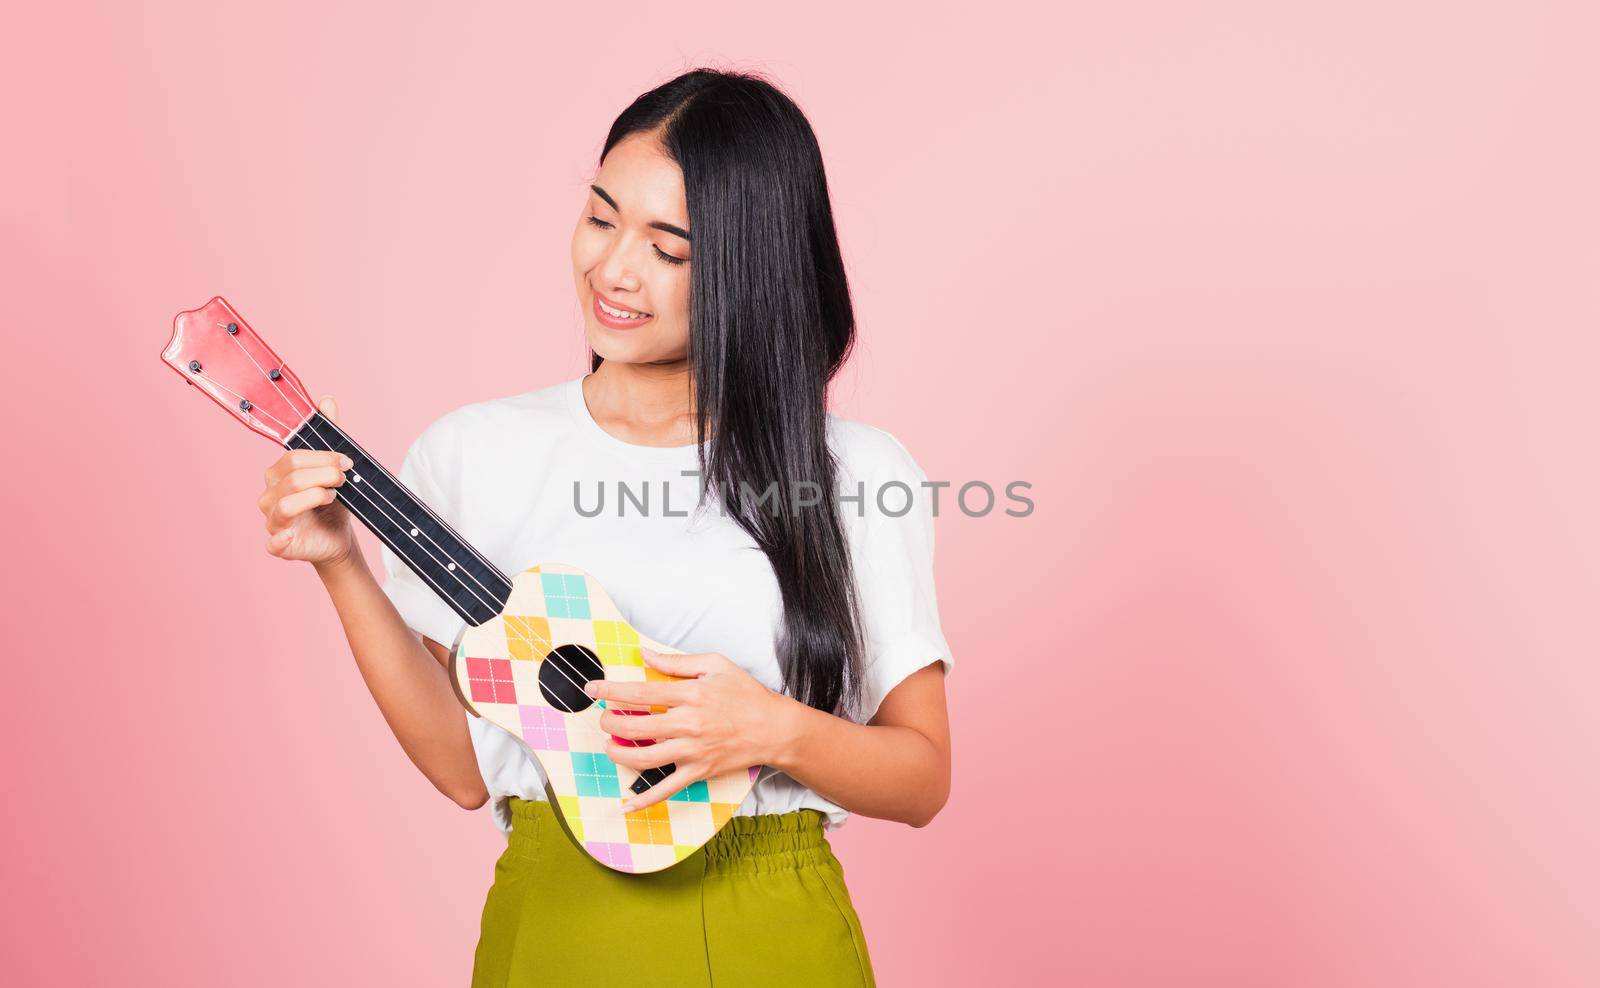 Portrait of happy Asian beautiful young woman teen confident smiling face hold acoustic Ukulele guitar, female playing Hawaiian small guitar, studio shot isolated on pink background, with copy space